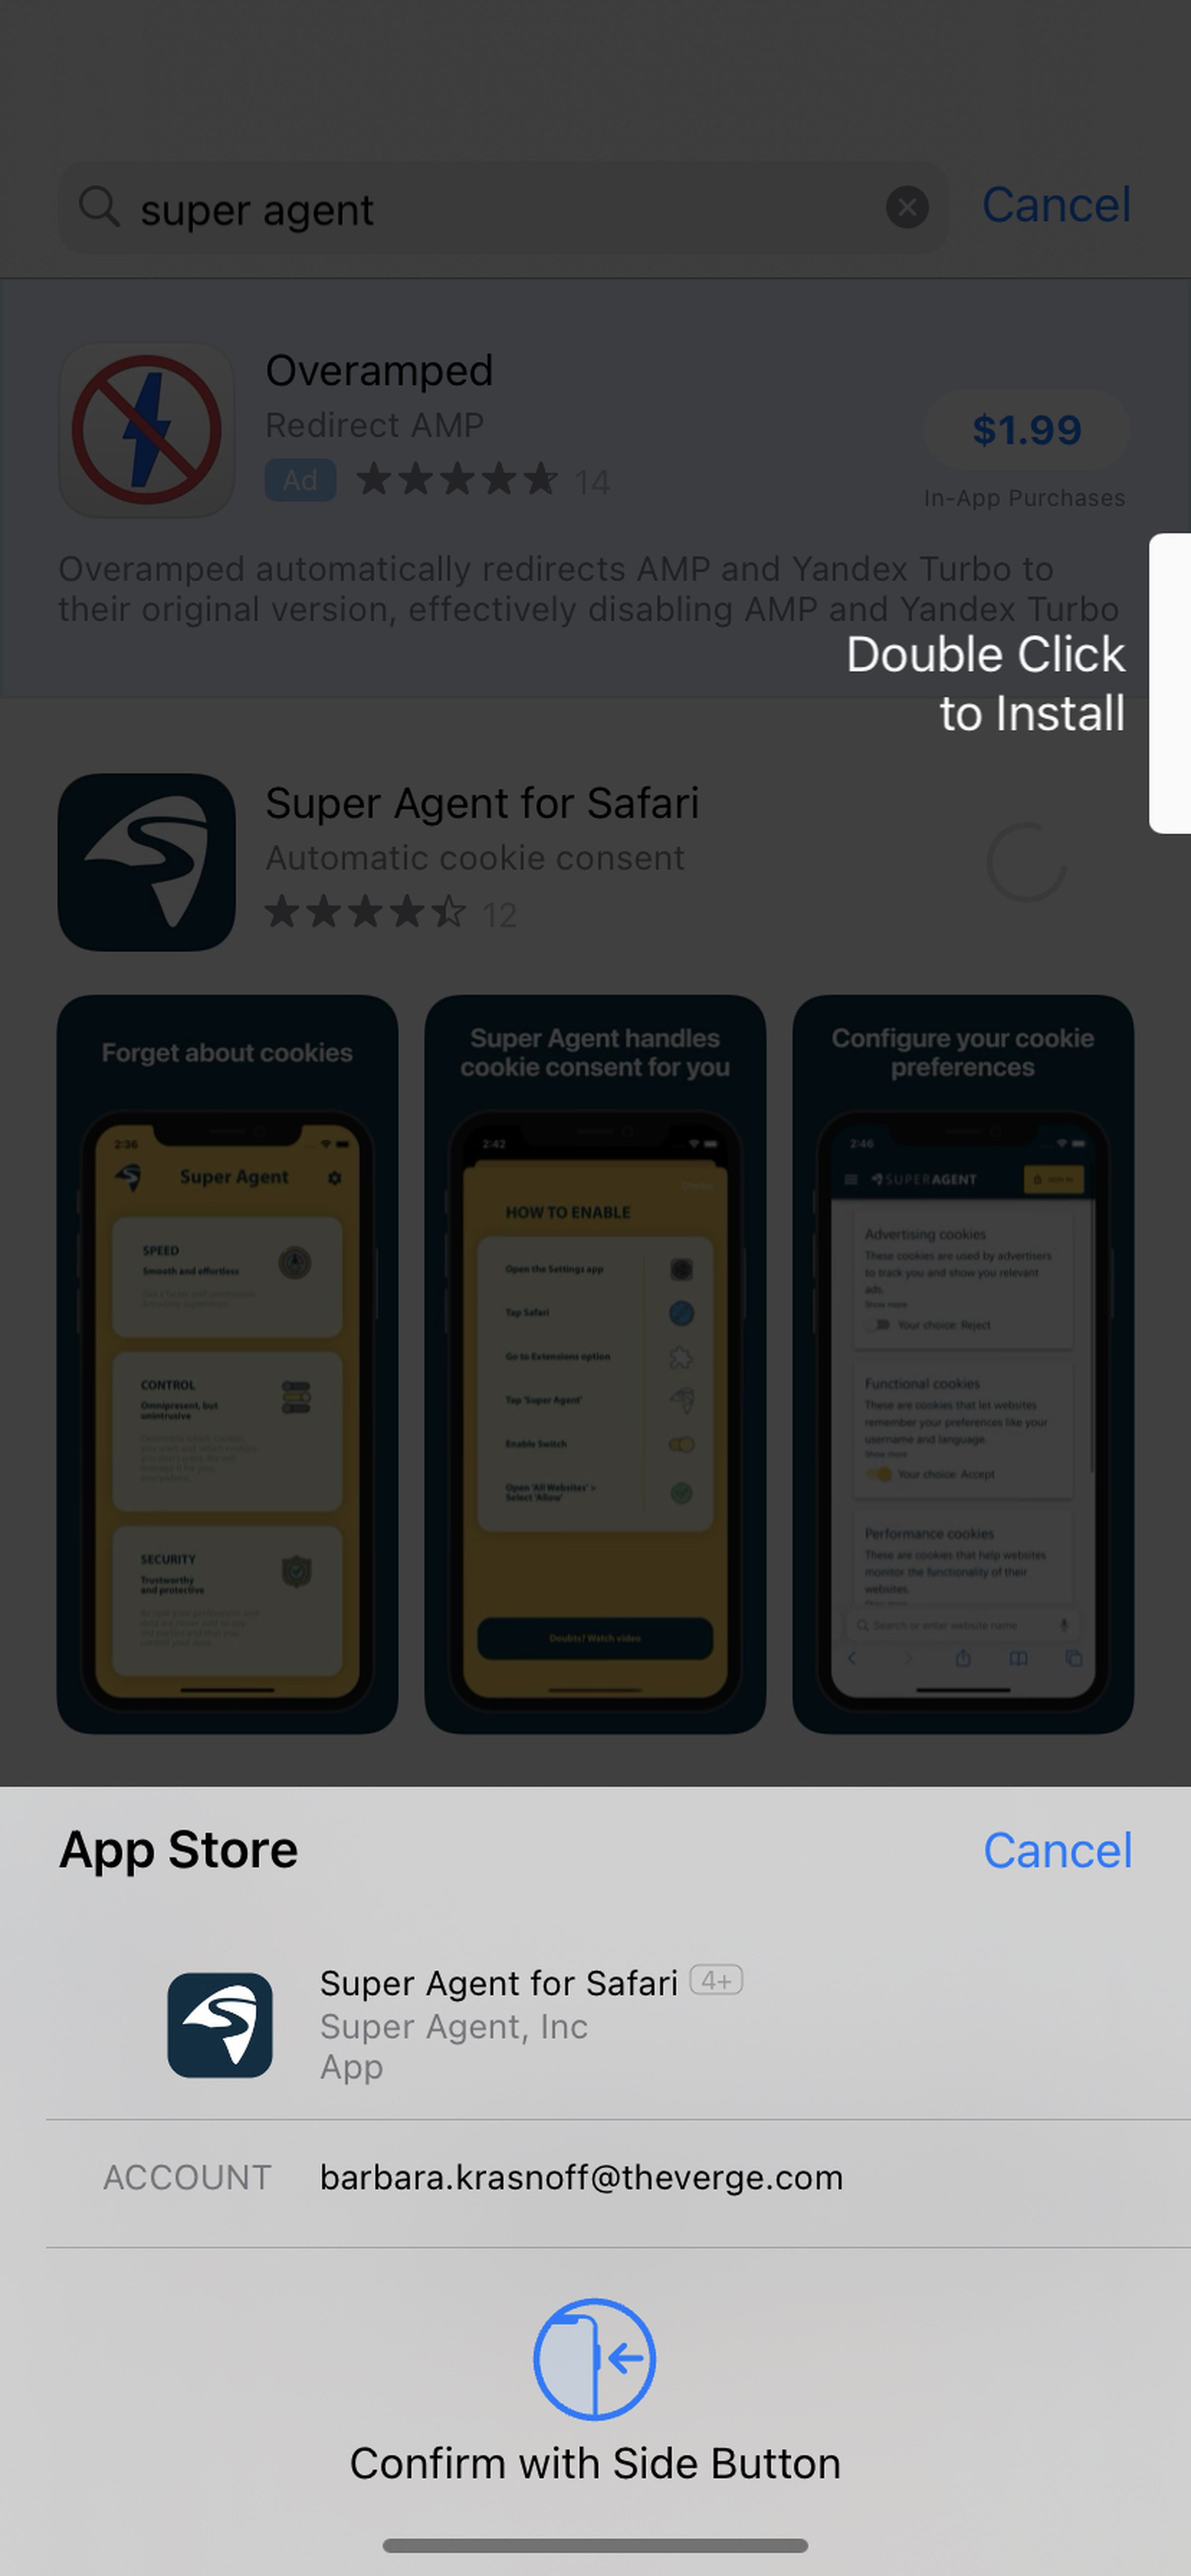 It’s simple to install a new extension from the App Store.